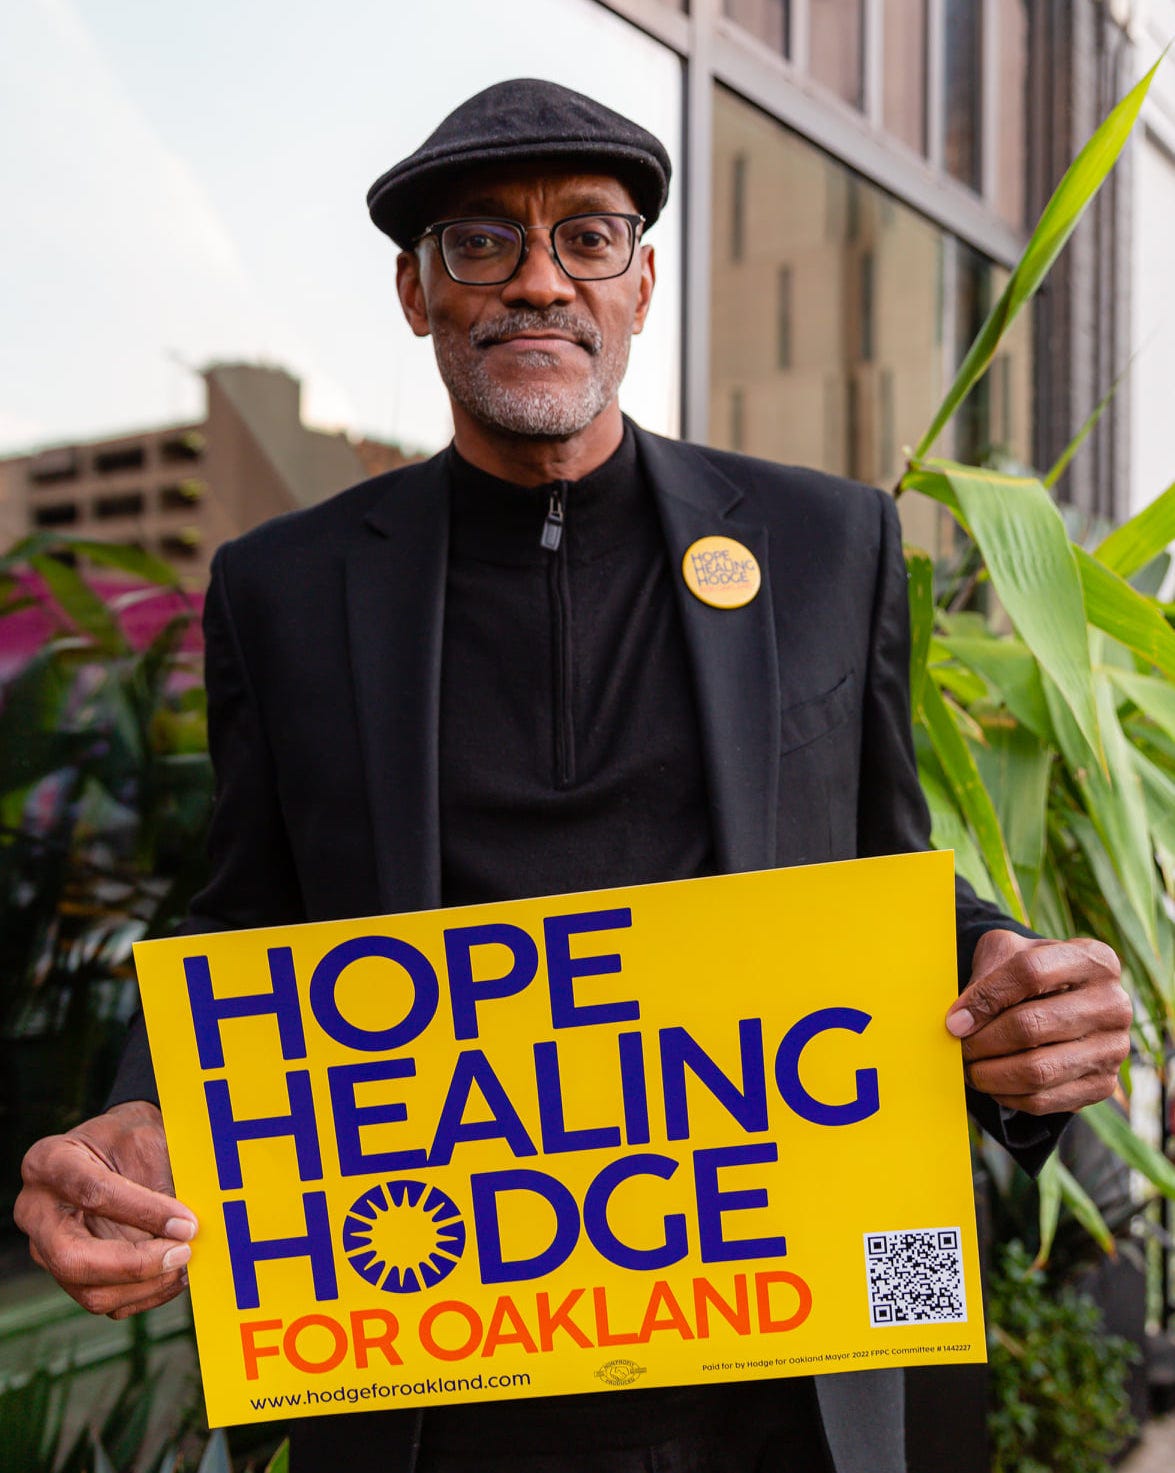 Greg standing, with a black cap and jacket, holding his campaign sign: "Hope, Healing, Hodge for Oakland"